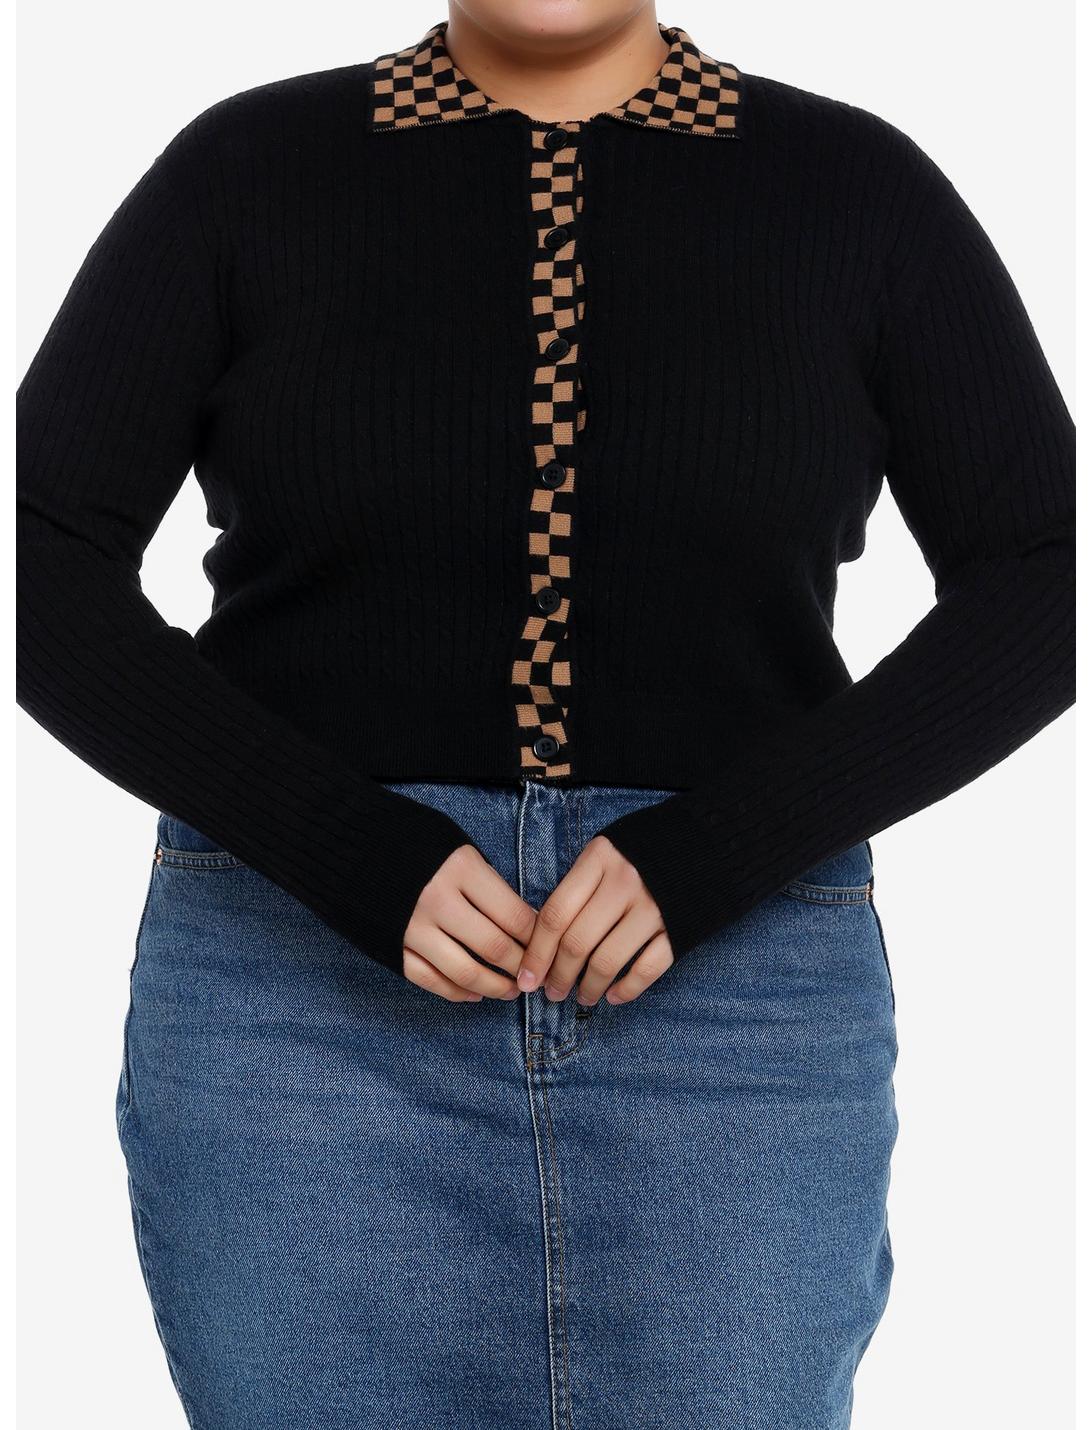 Social Collision Brown & Black Checkered Knit Girls Long-Sleeve Top Plus Size, BROWN, hi-res